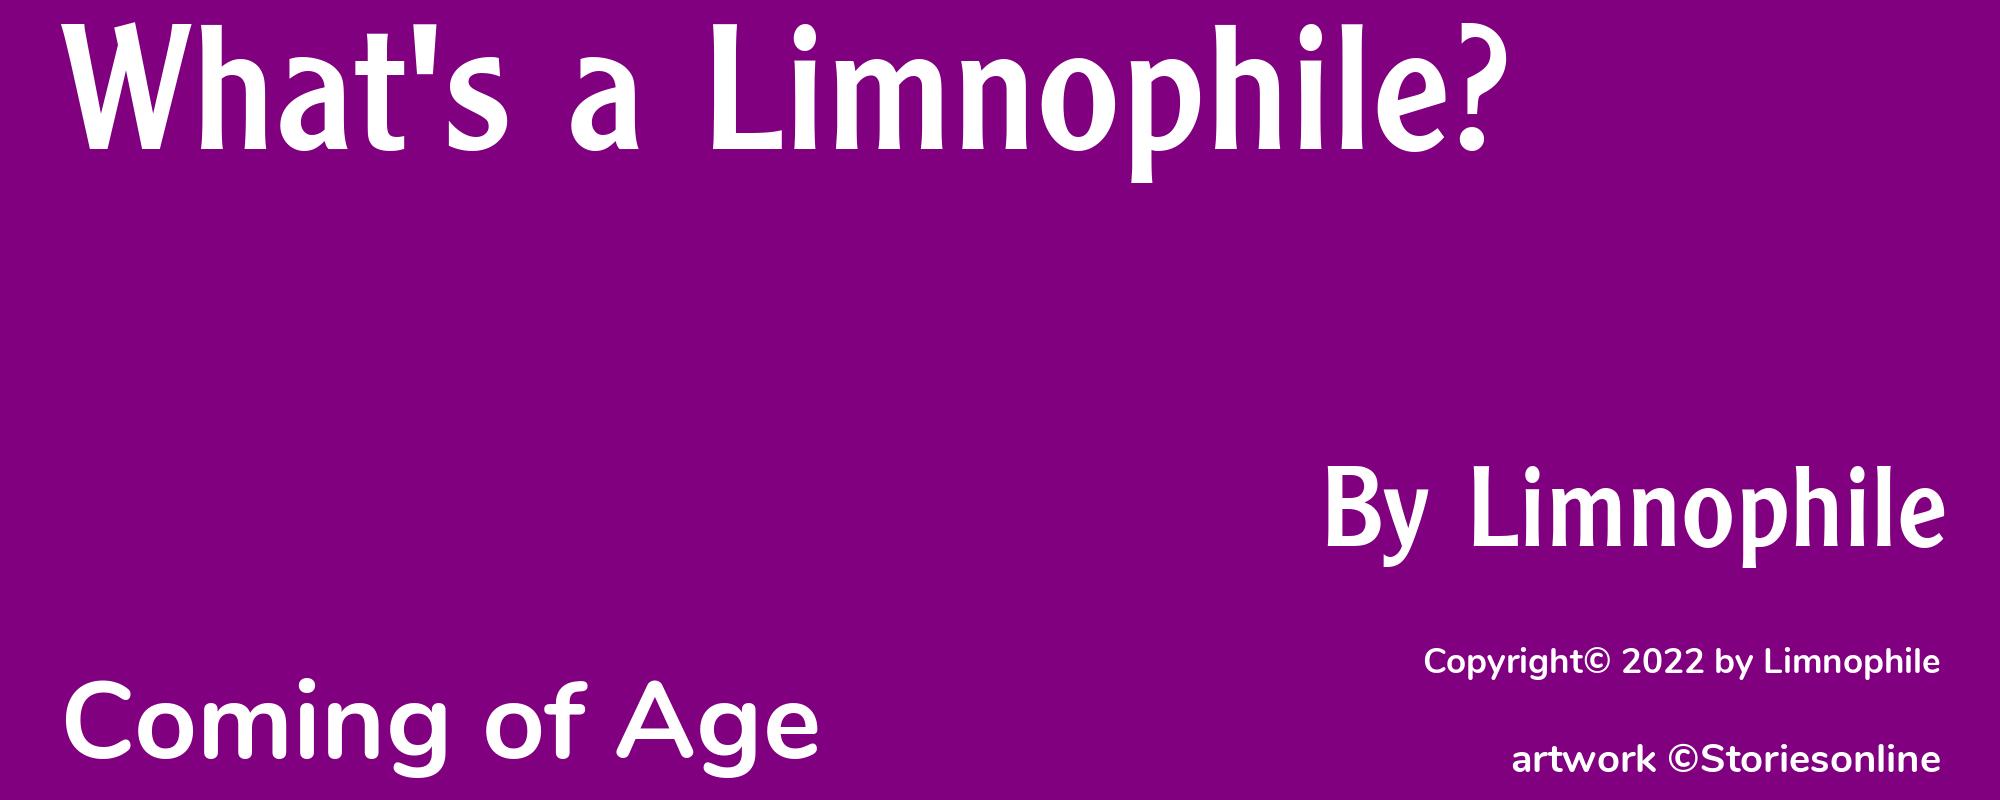 What's a Limnophile? - Cover